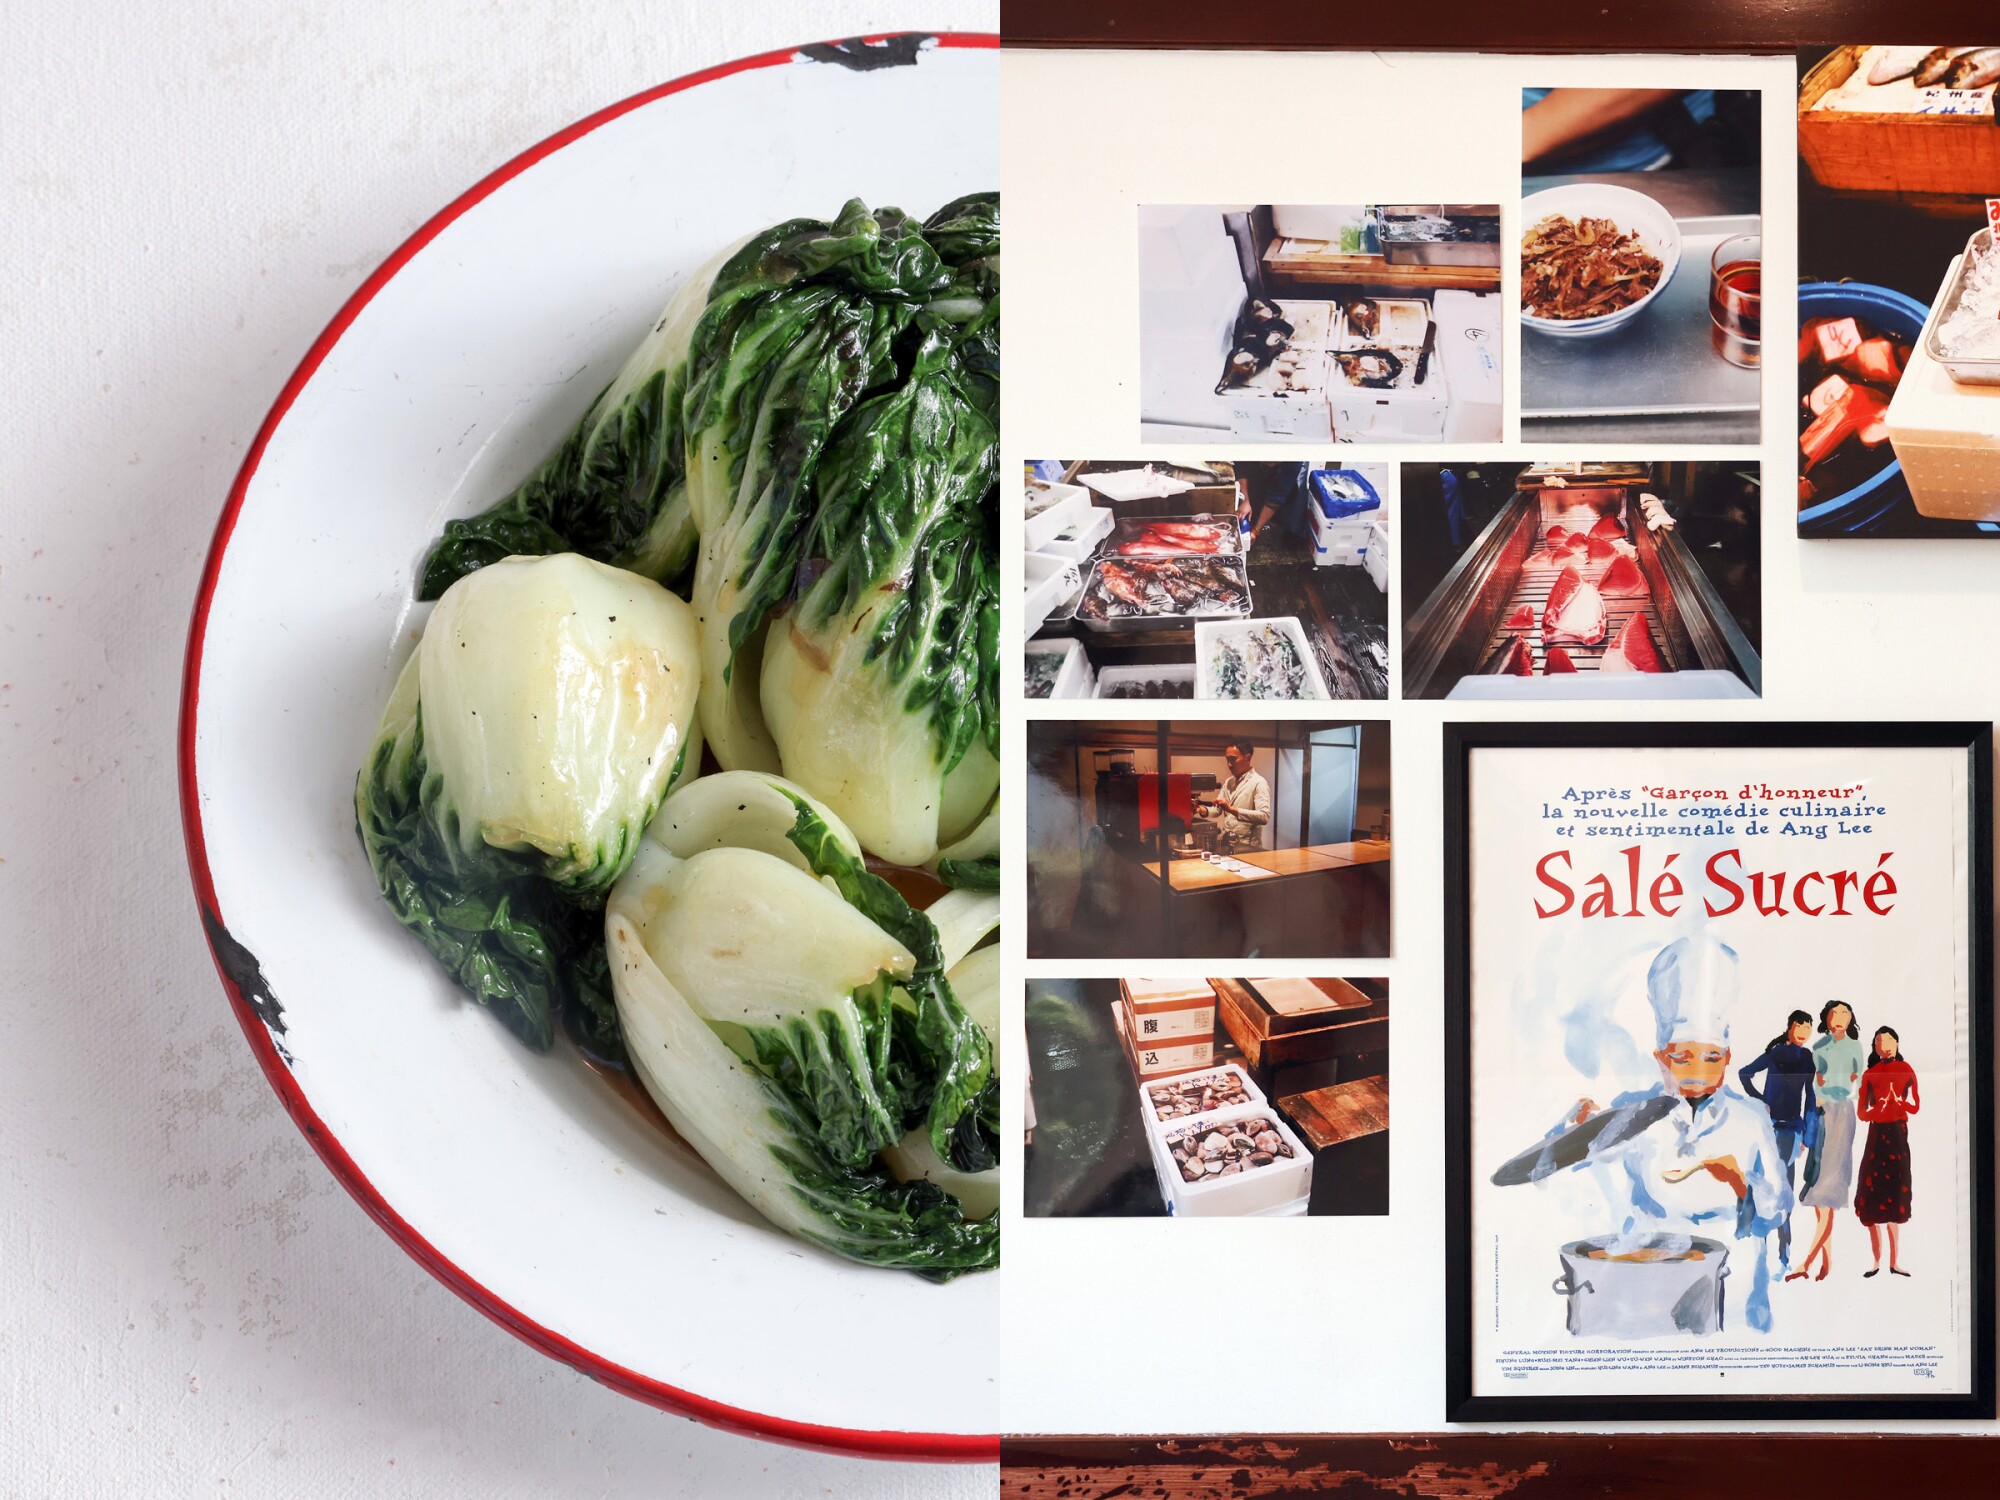 Two photos side-by-side of a bowl of bok choy and a wall of posters.